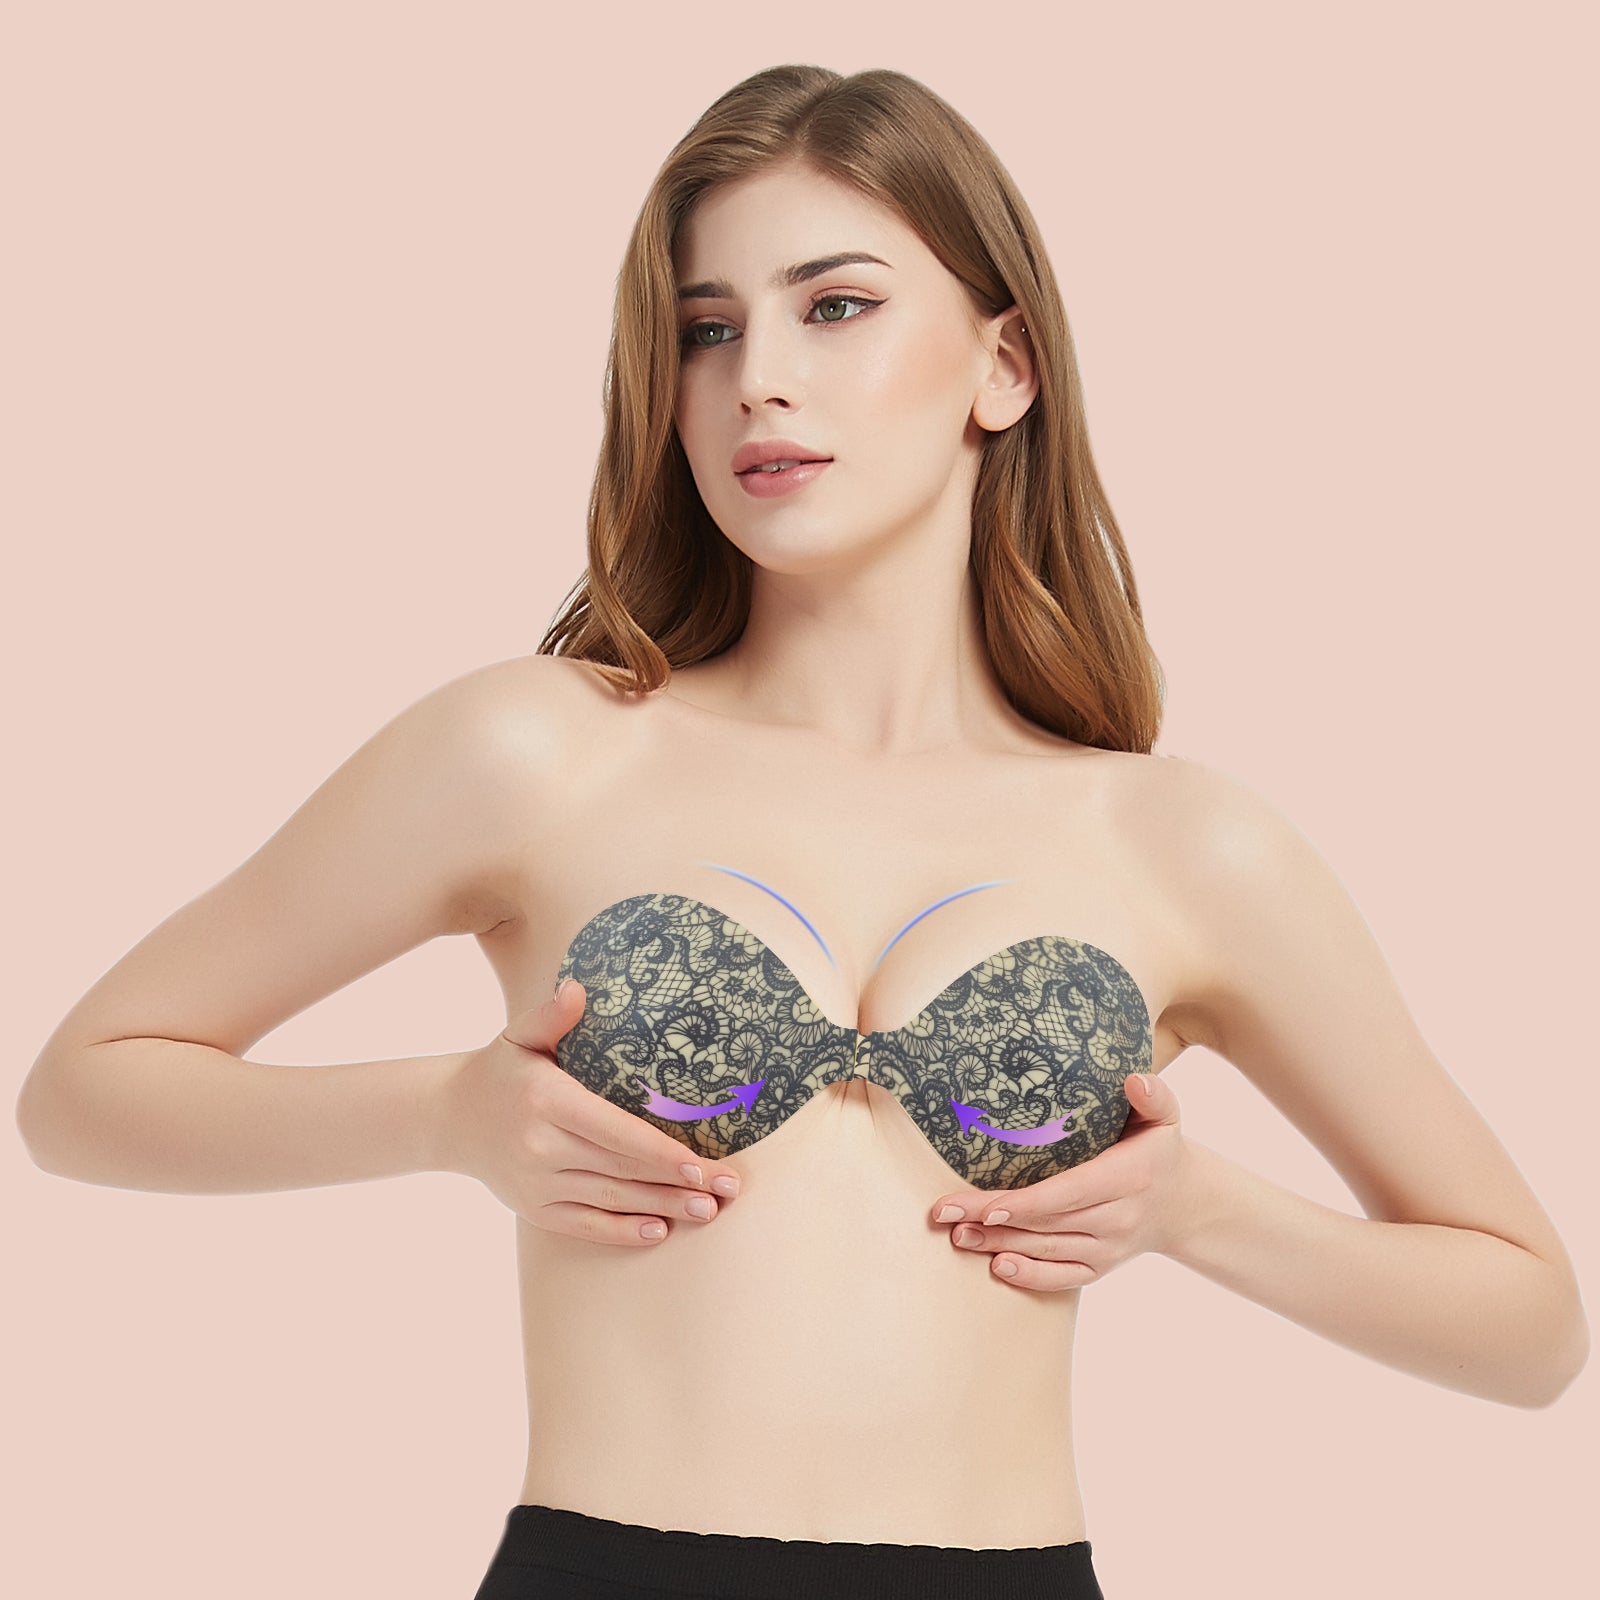 KISSBOBO Adhesive Bra, Lace Pattern Strapless Adhesive Backless Bra,Reusable Bra Backless Invisible, Come with Nipple Pads for Evening Dress Wedding Dress Swimsuit and Backless Clothing-1